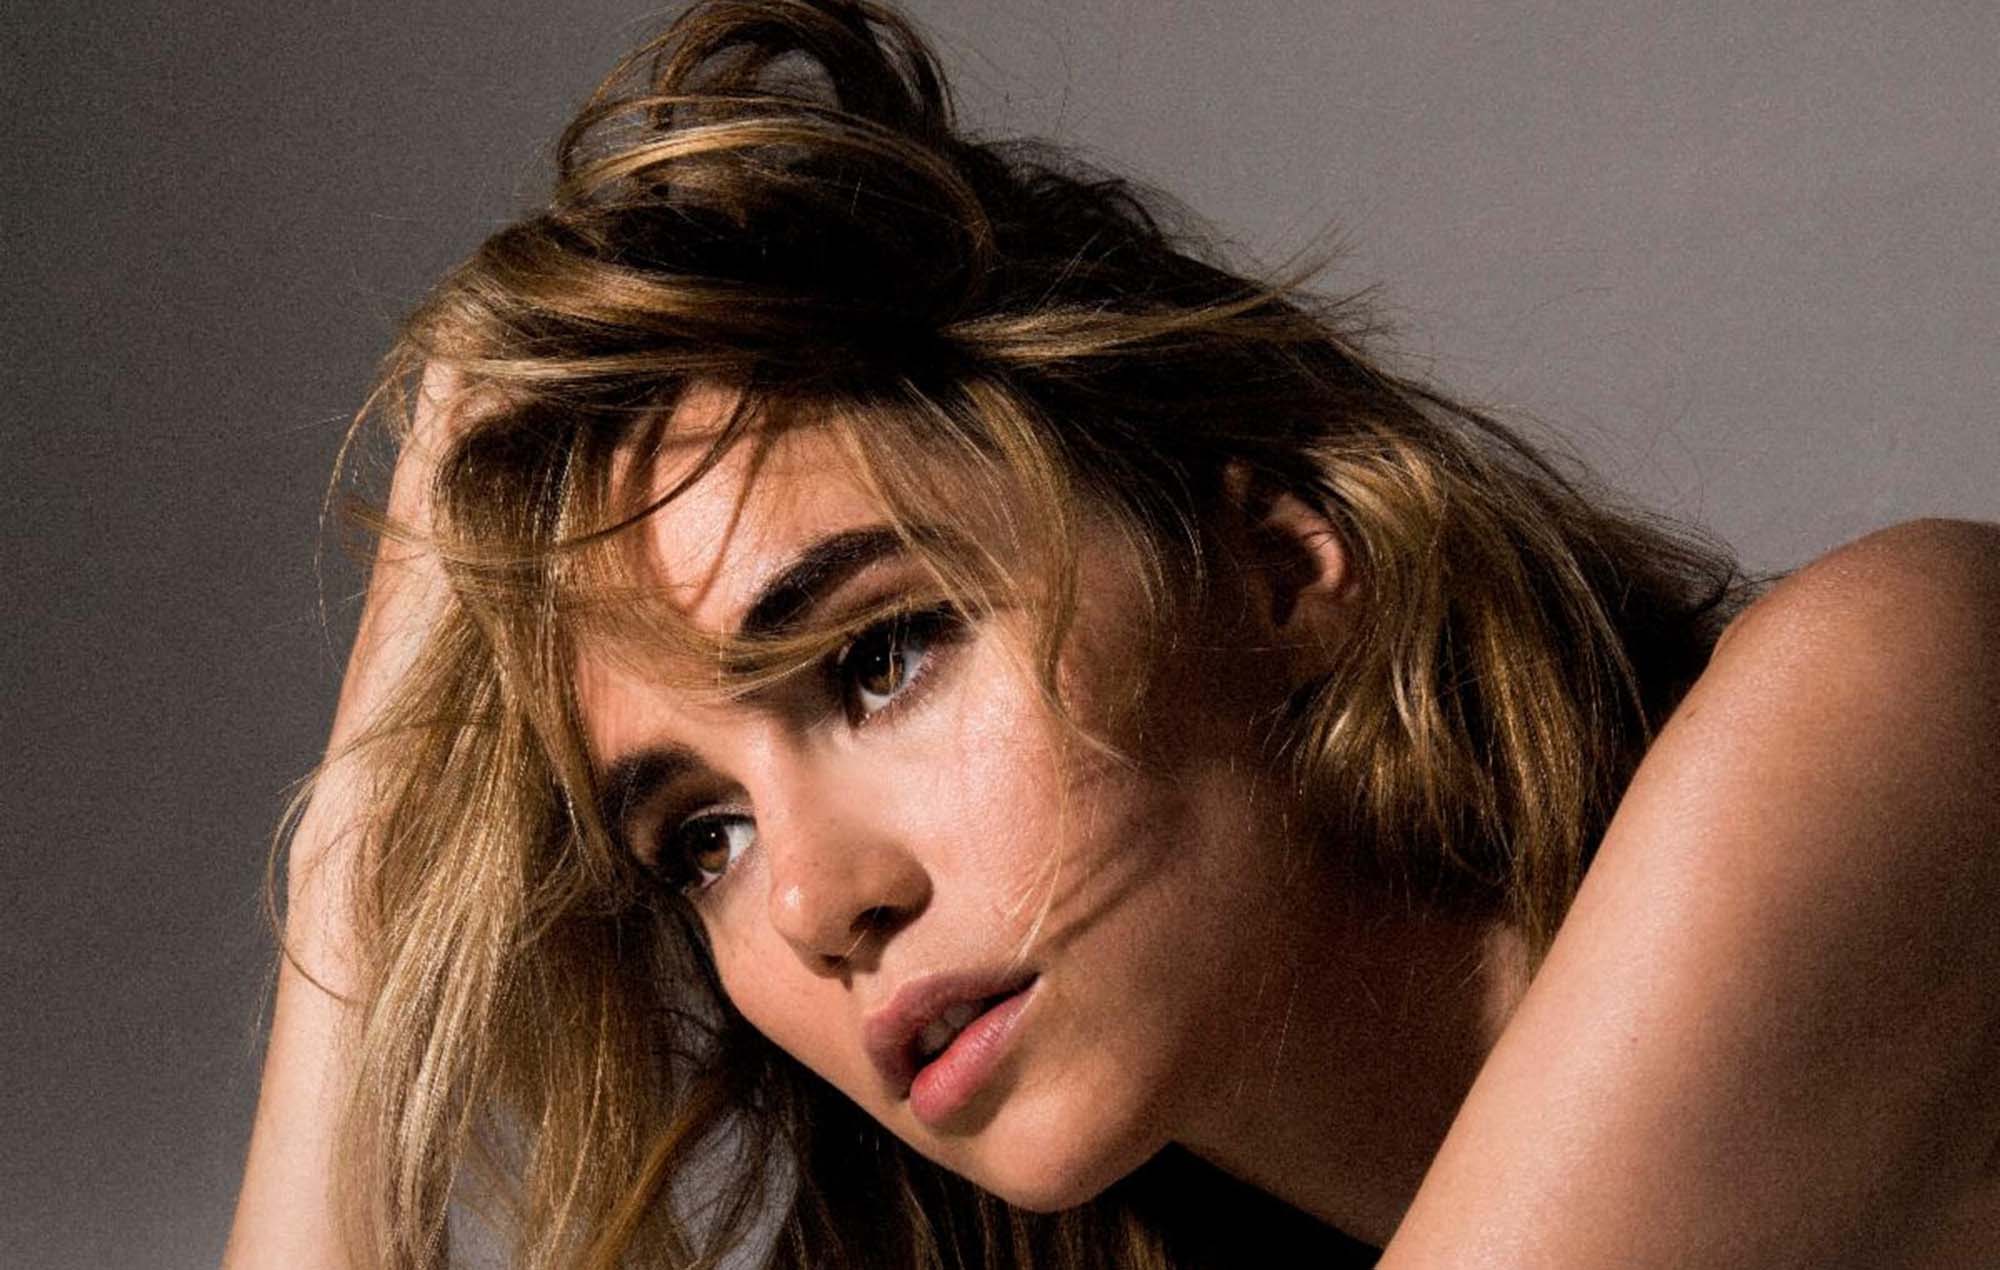 Suki Waterhouse on her debut album: “Jumping into anxieties made me feel free”